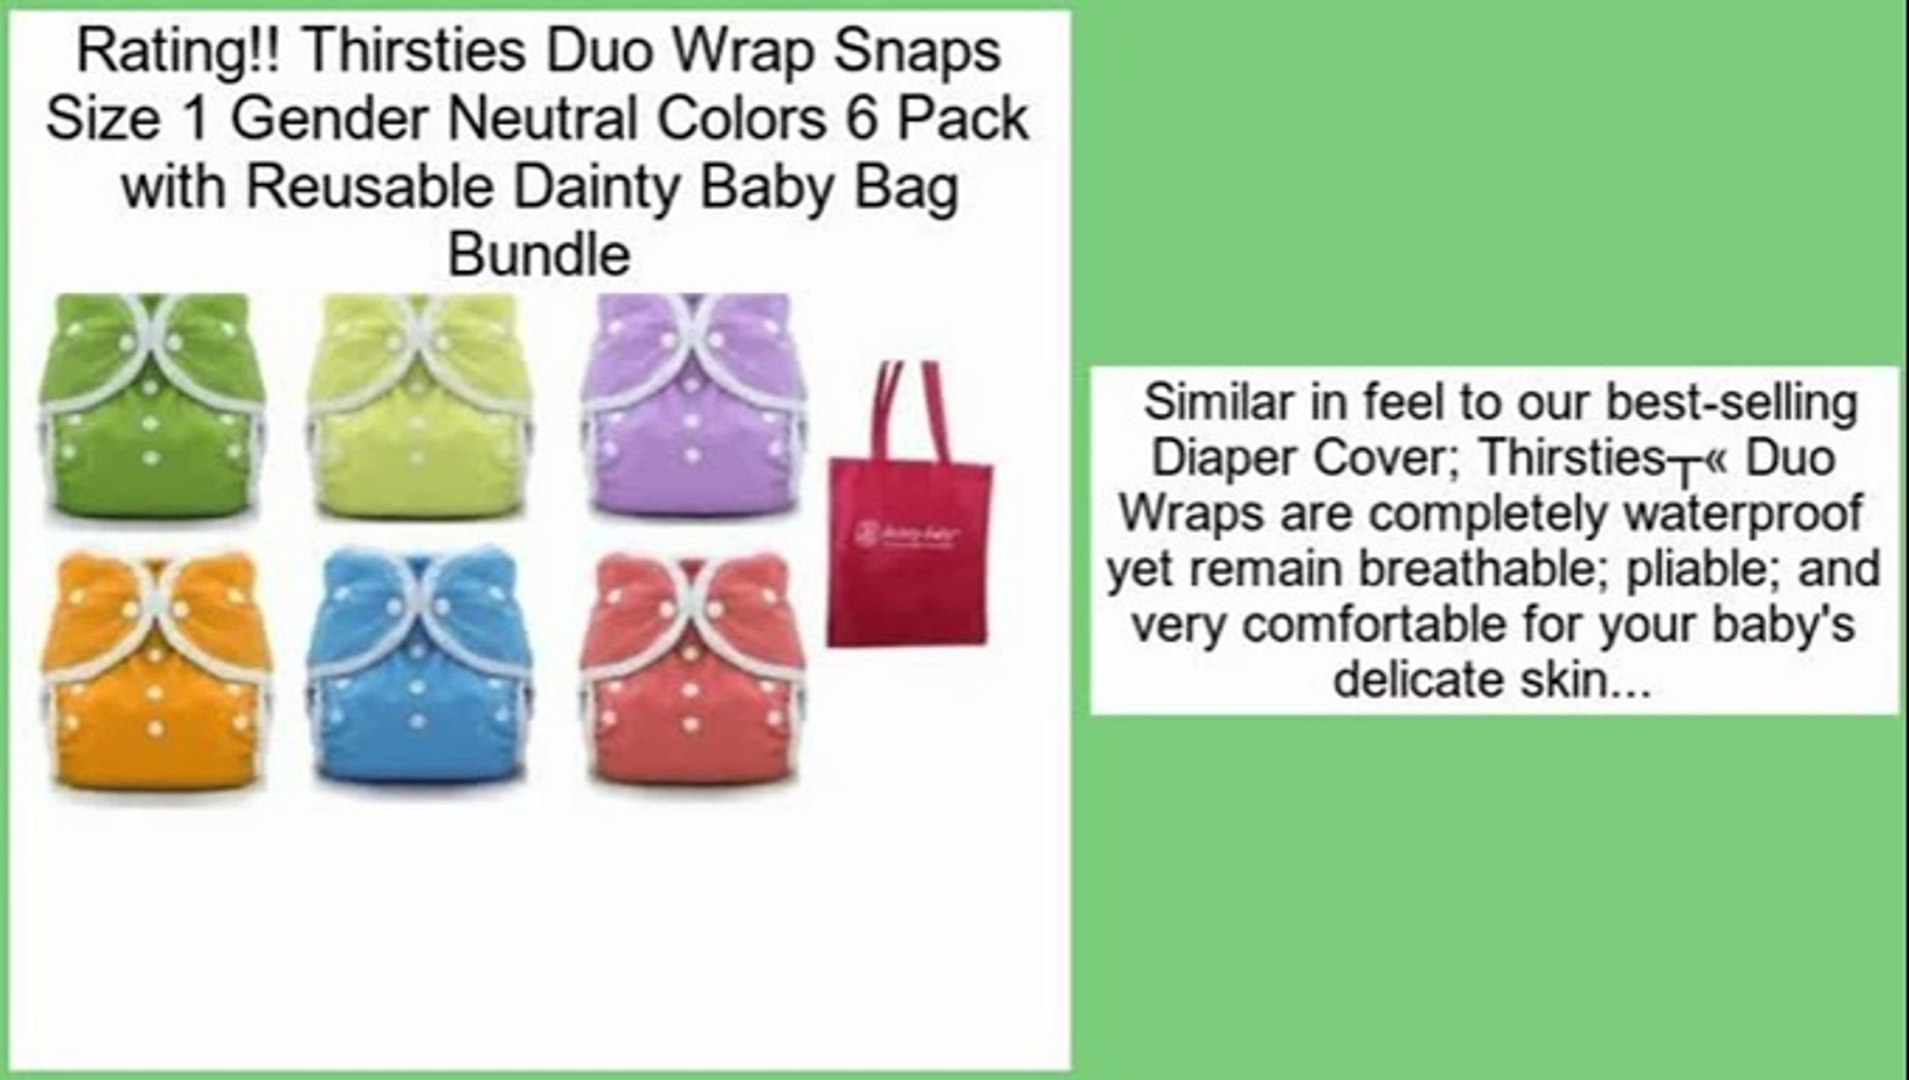 Comparison Thirsties Duo Wrap Snaps Size 1 Gender Neutral Colors 6 Pack With Reusable Dainty Baby Bag Bundle Video Dailymotion,Shortbread Recipe